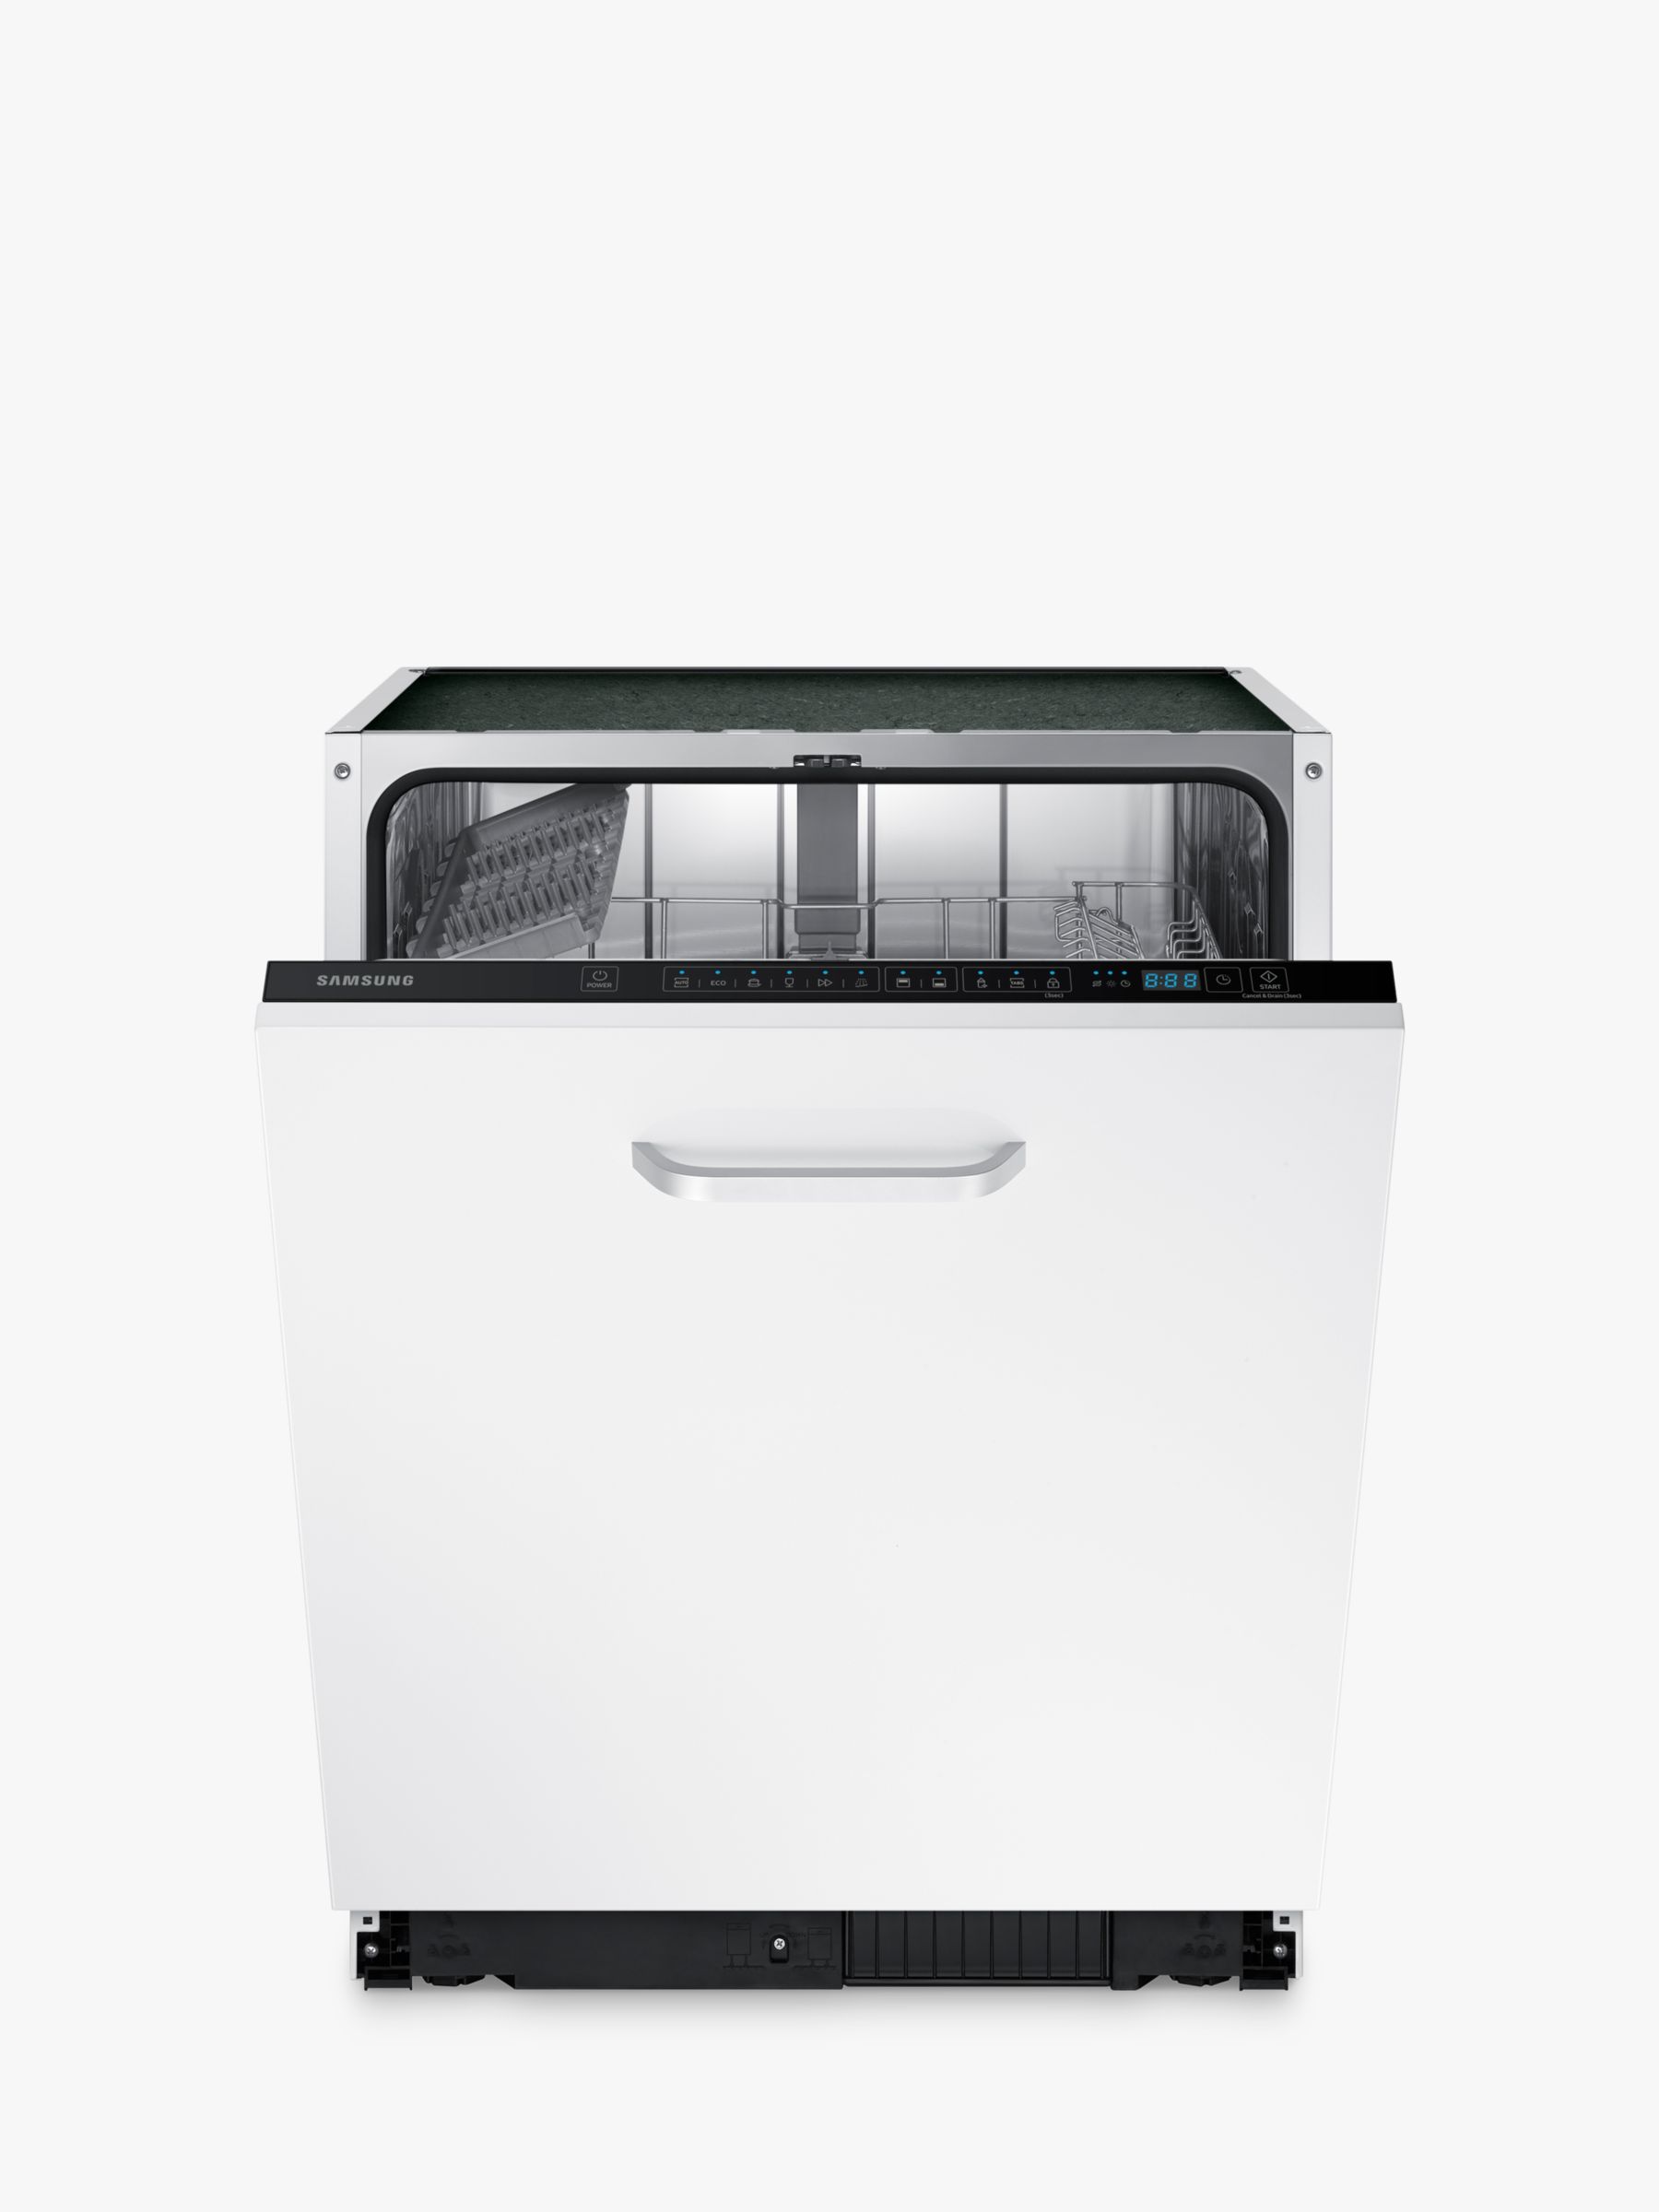 Samsung Series 6 DW60M6040BB Fully Integrated Dishwasher